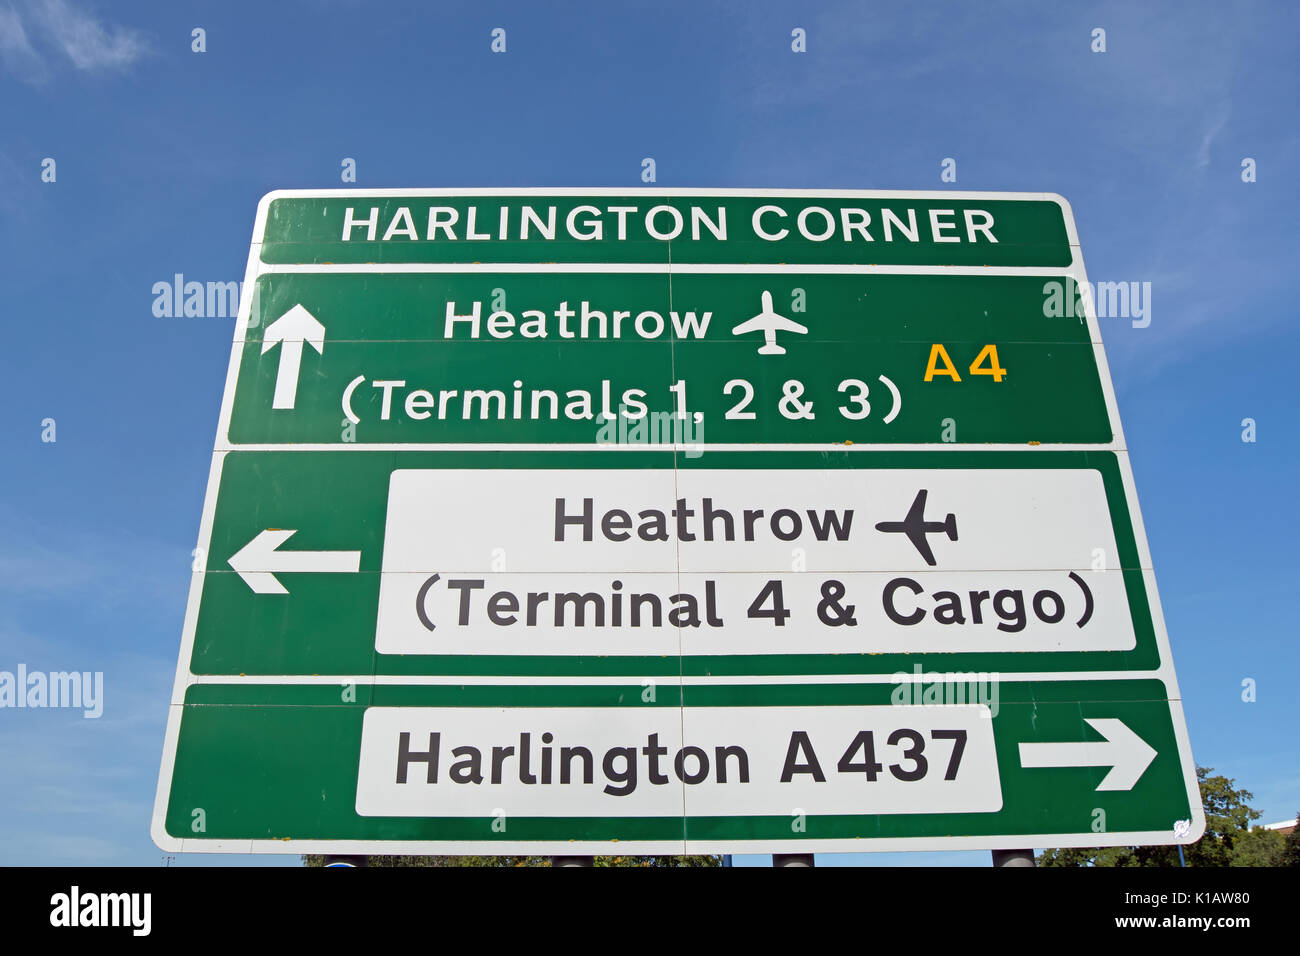 road sign on the A4 at harlington corner, west london, england, showing routes for harlington and heathrow airport terminals Stock Photo